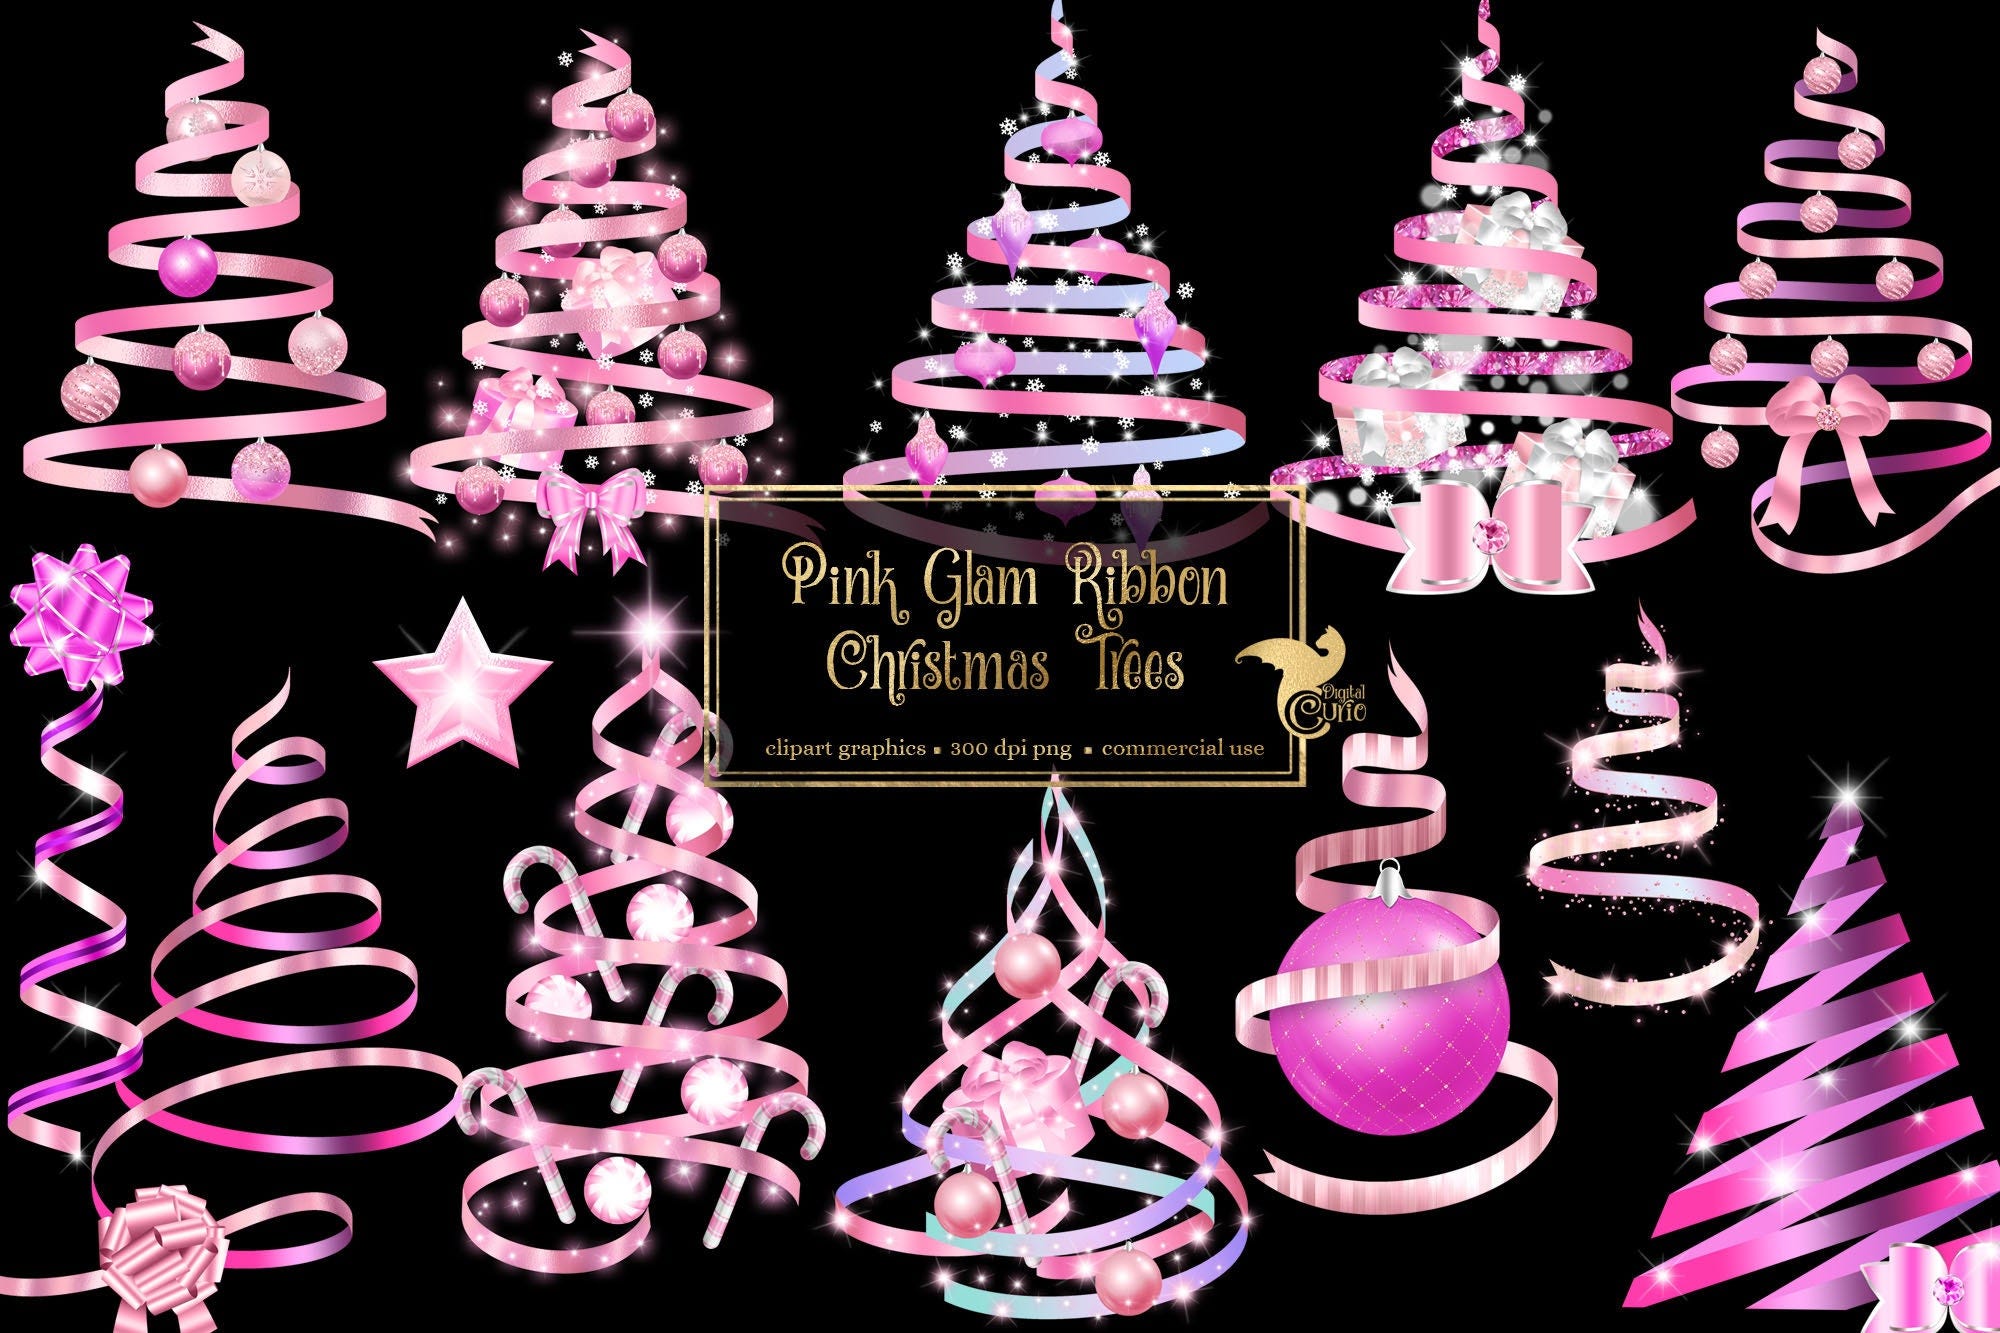 Pink Glam Ribbon Christmas Tree Clip Art - digital holiday glitter png graphics for instant download commercial use